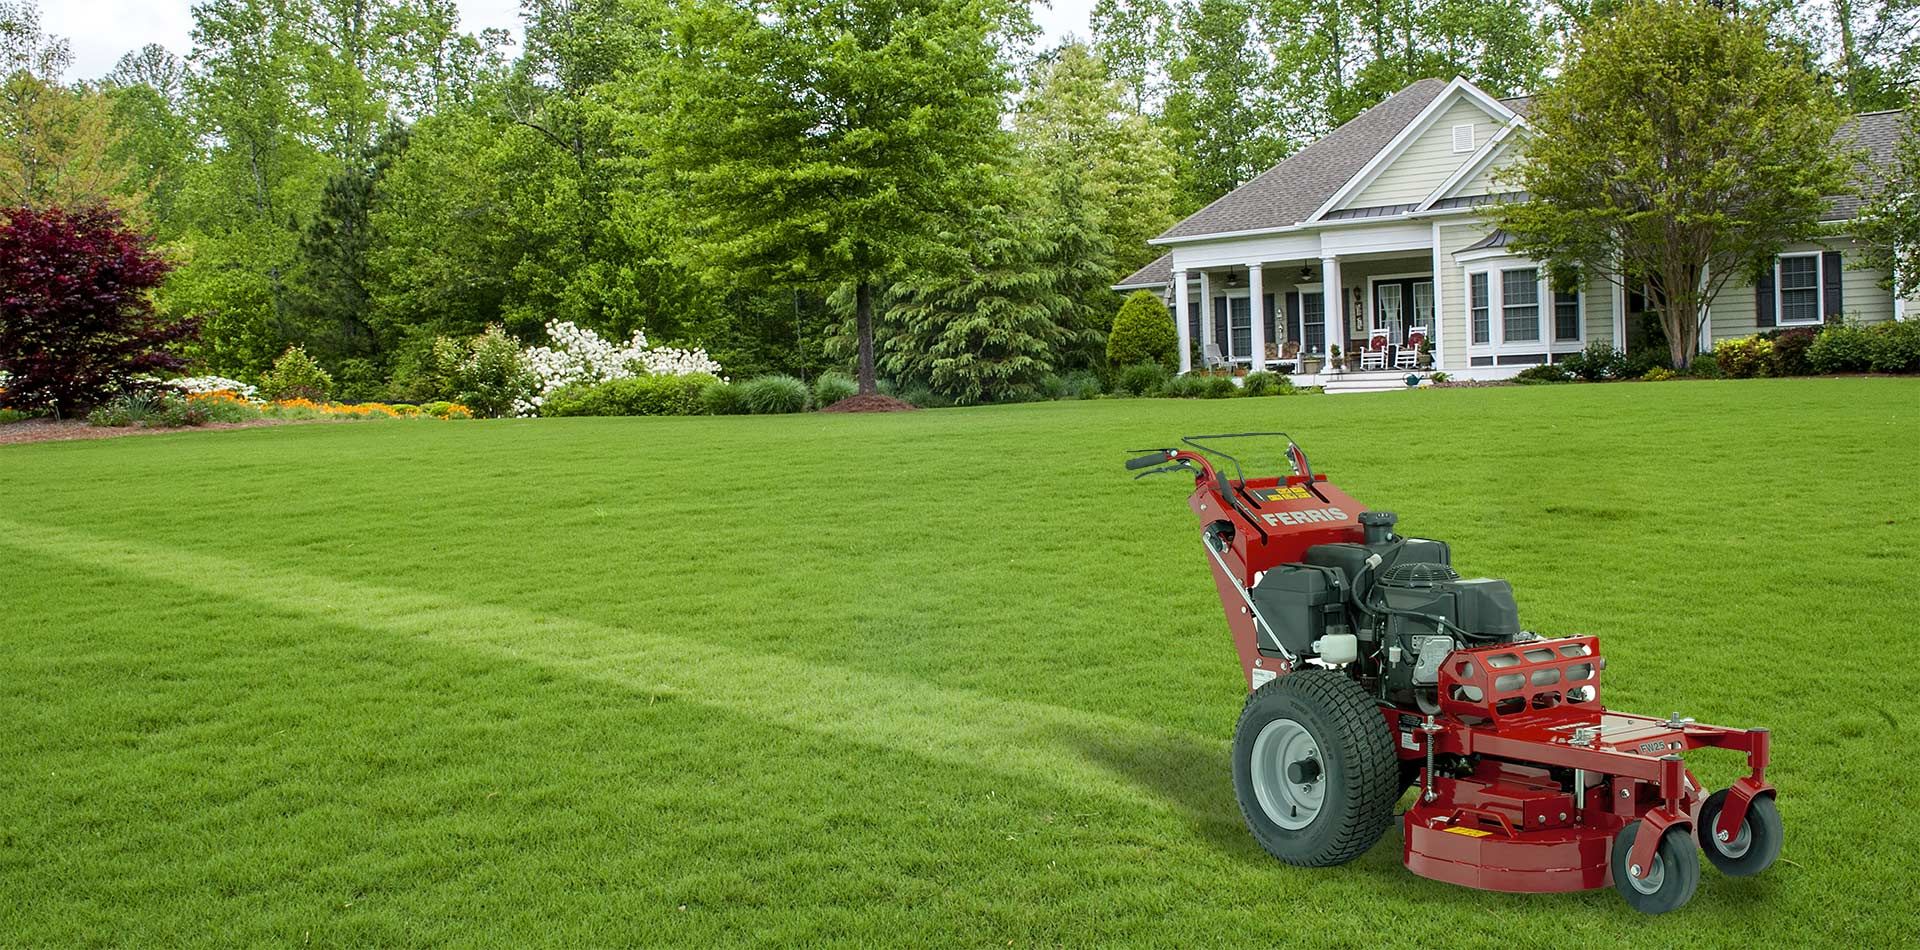 What Time Can You Start Mowing Your Lawn In Texas